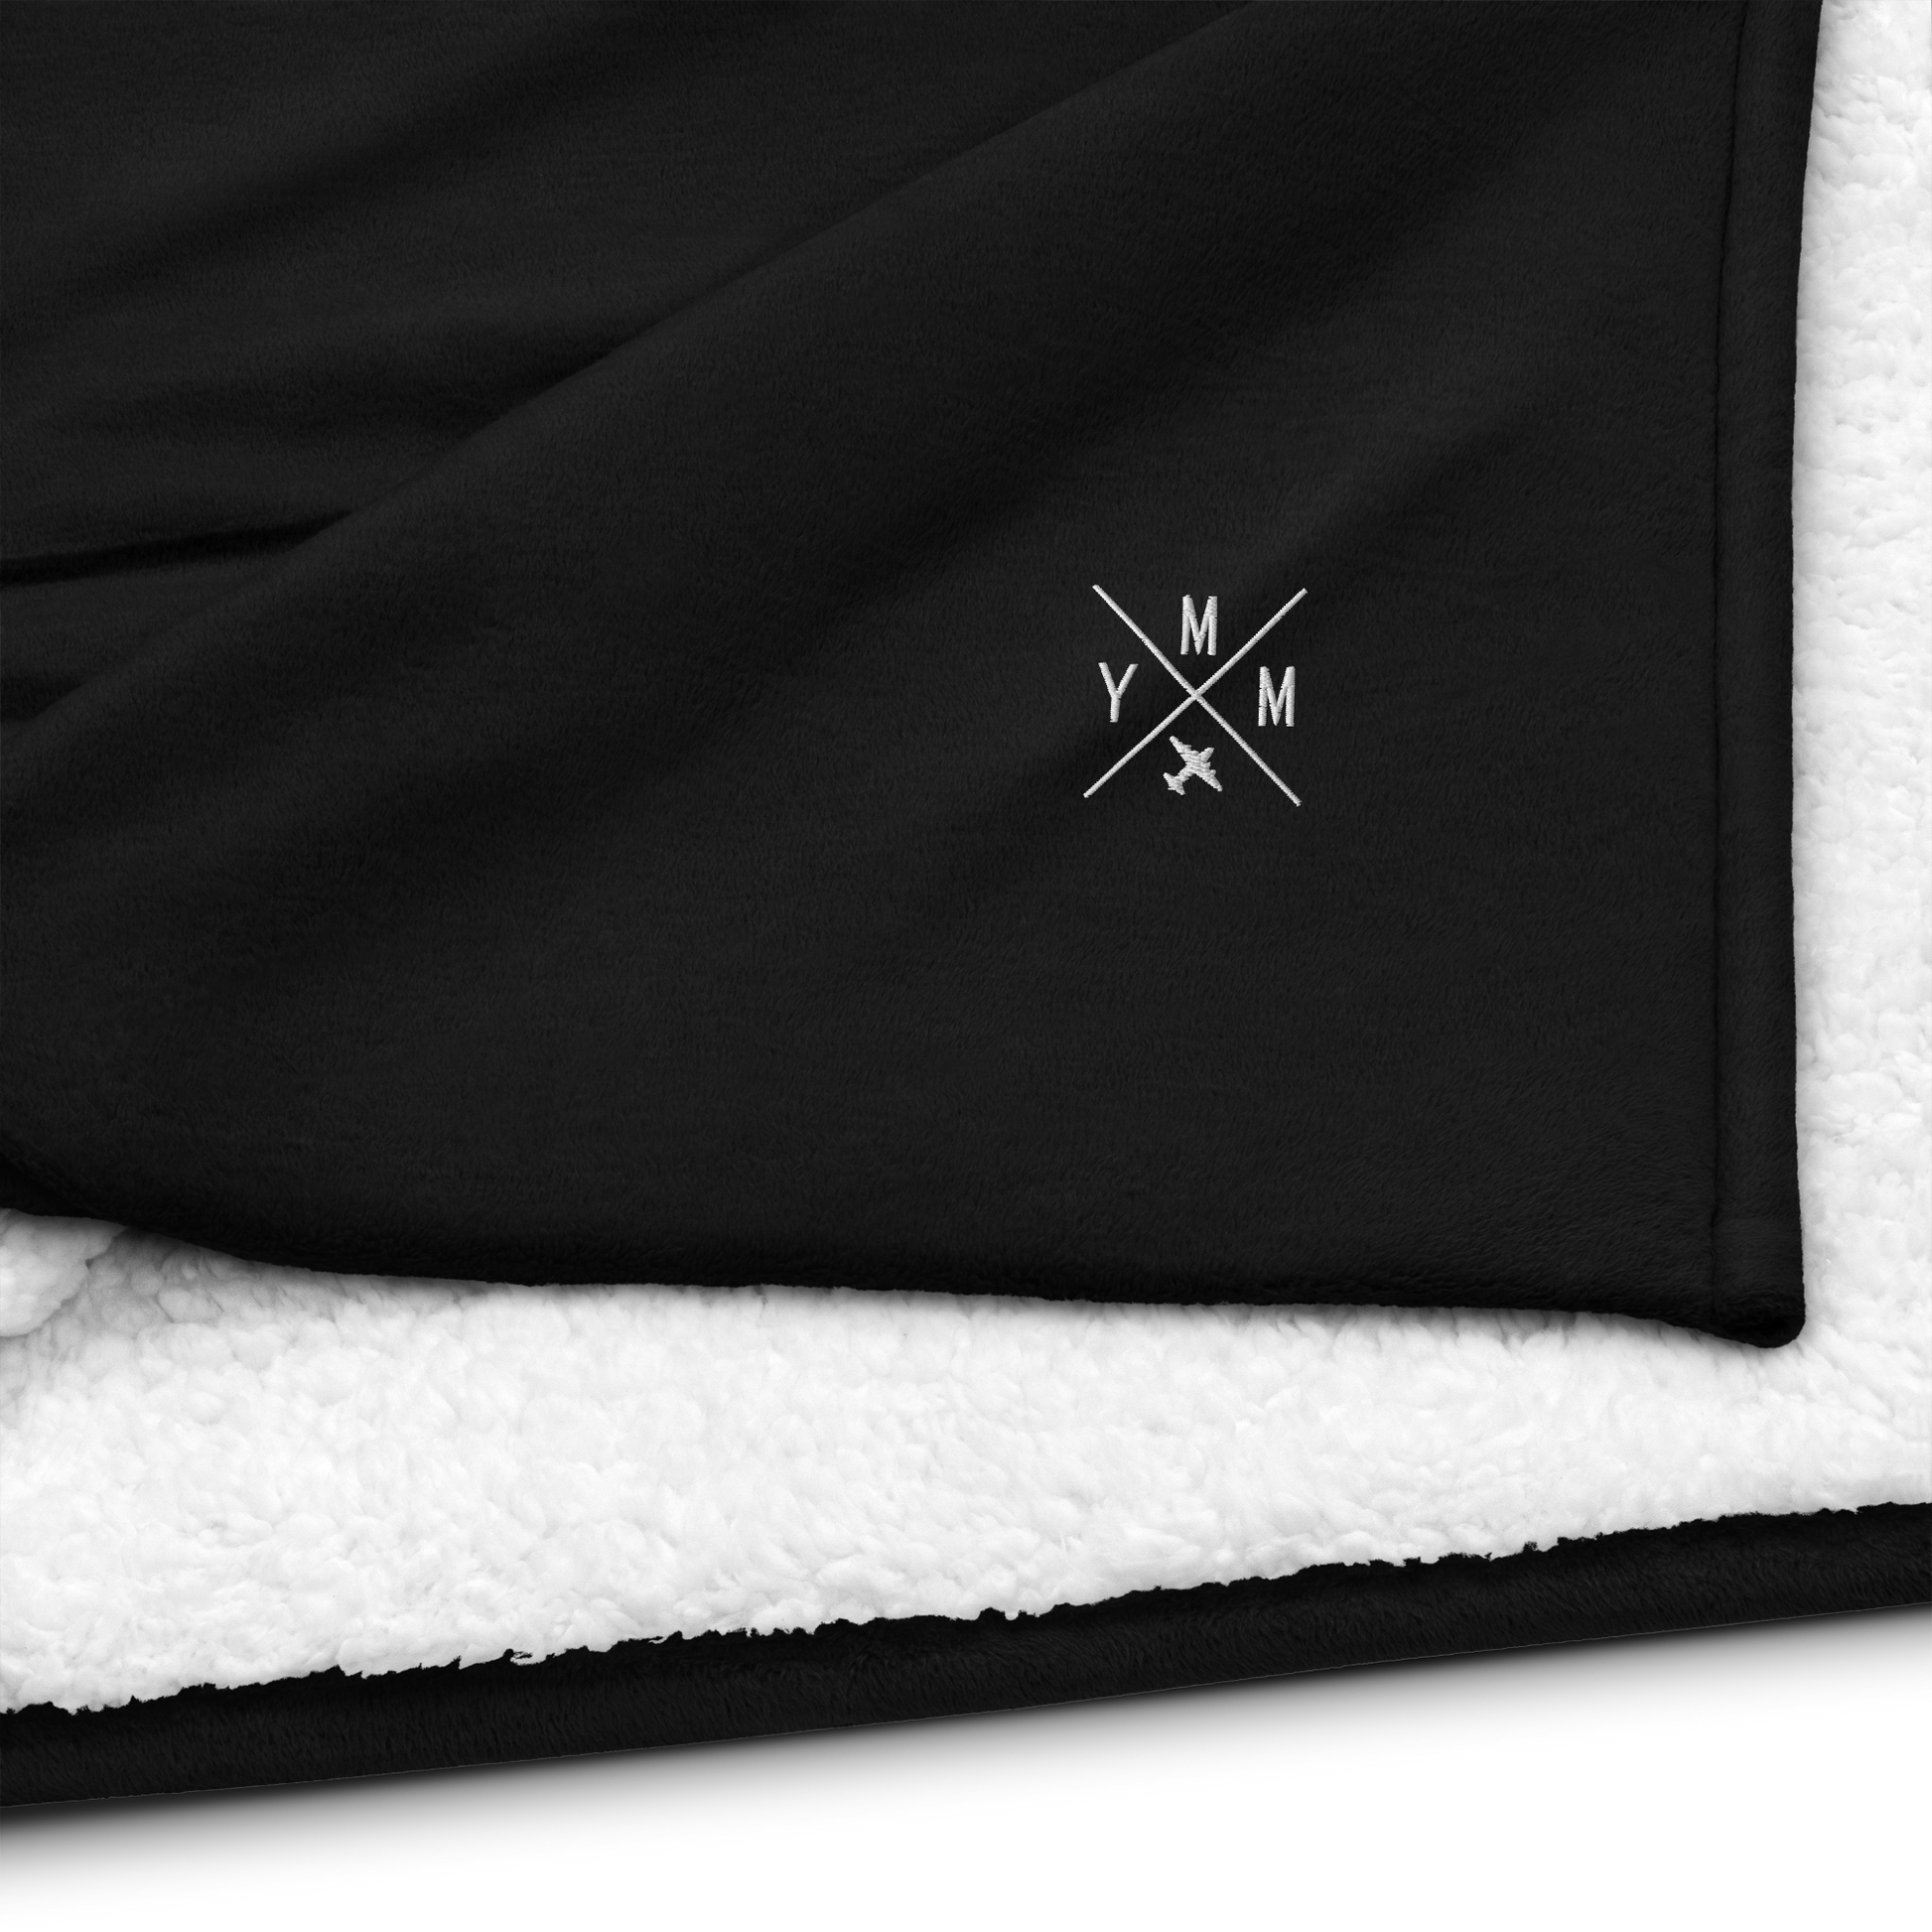 YHM Designs - YMM Fort McMurray Premium Sherpa Blanket - Crossed-X Design with Airport Code and Vintage Propliner - White Embroidery - Image 03